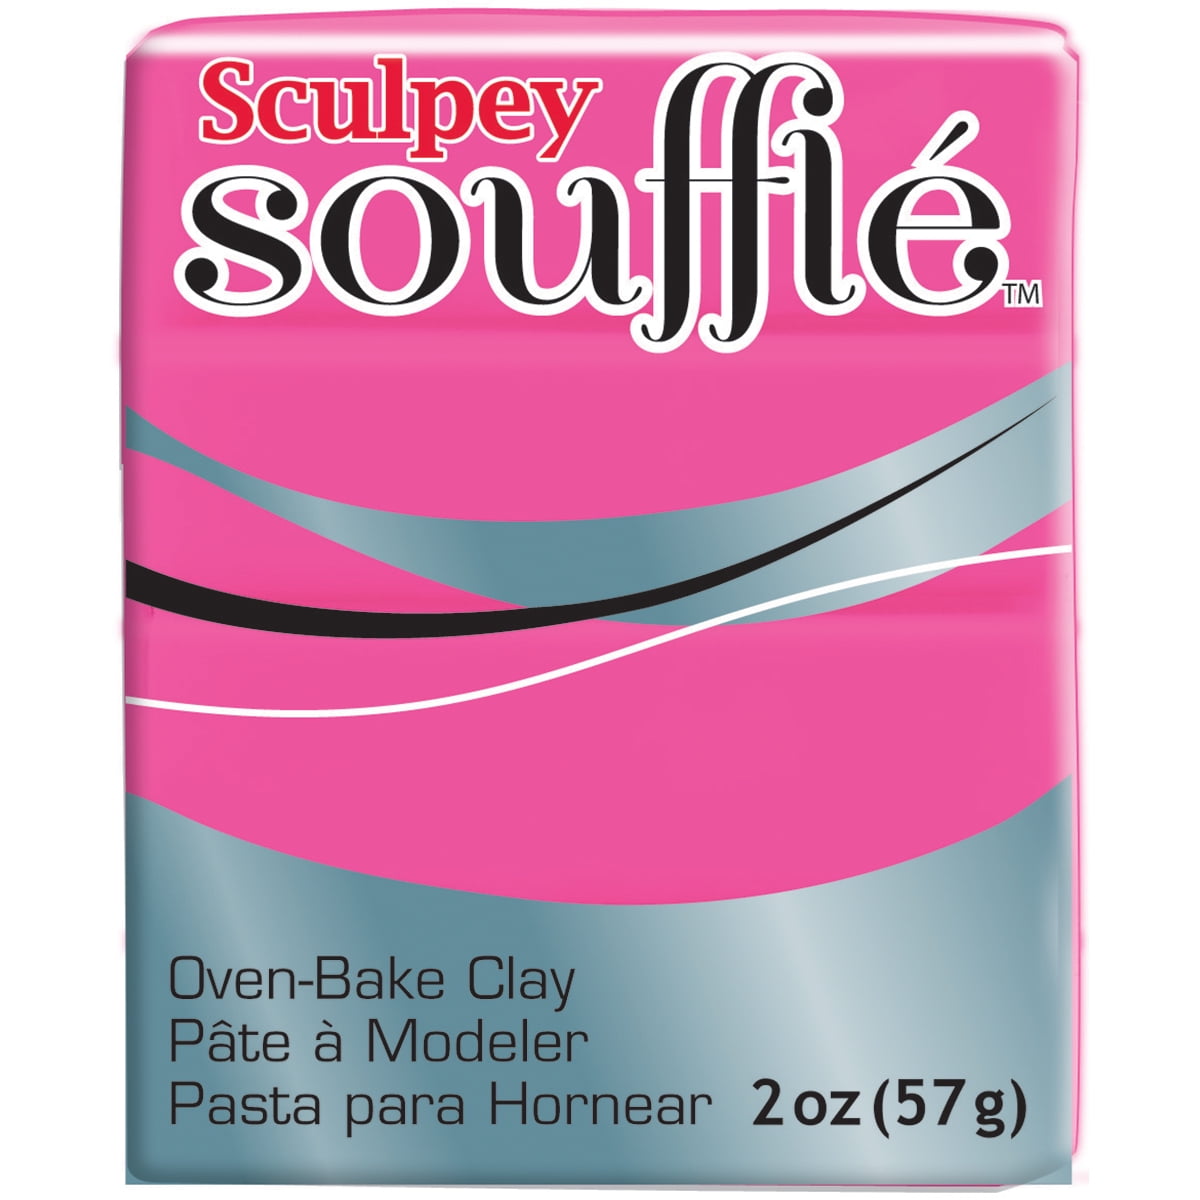 Sculpey Soufflé Polymer Oven-Bake Clay, Poppyseed Black, Non Toxic, 1.7 oz.  bar,Great for jewelry making, holiday, DIY, mixed media and more! Premium